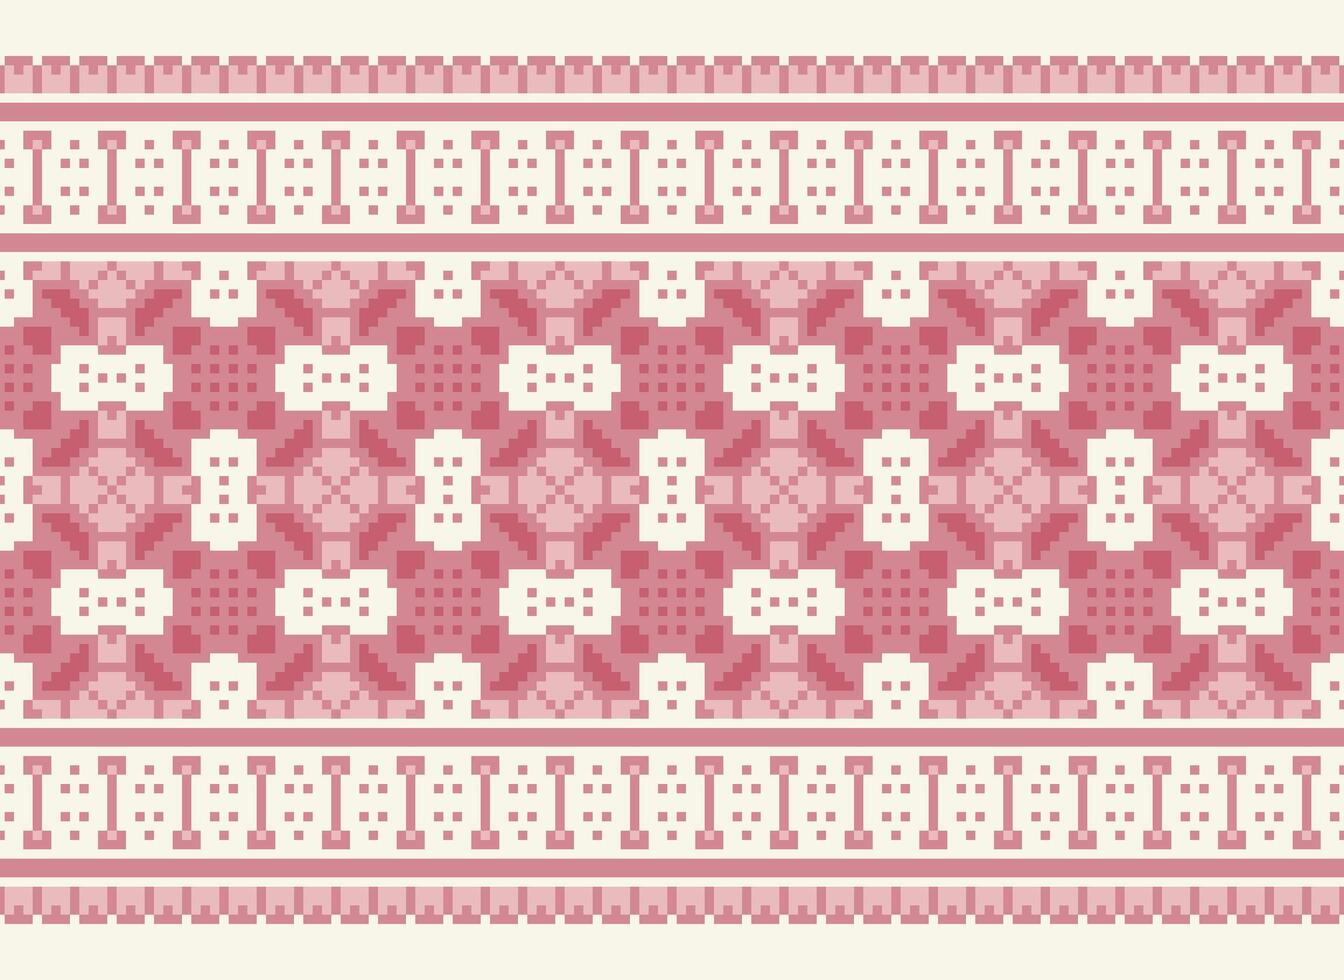 Geometric ethnic pattern. Pixel pattern. Design for clothing, fabric, background, wallpaper, wrapping, batik. Knitwear, Embroidery style. Aztec geometric art ornament print. Vector illustration.